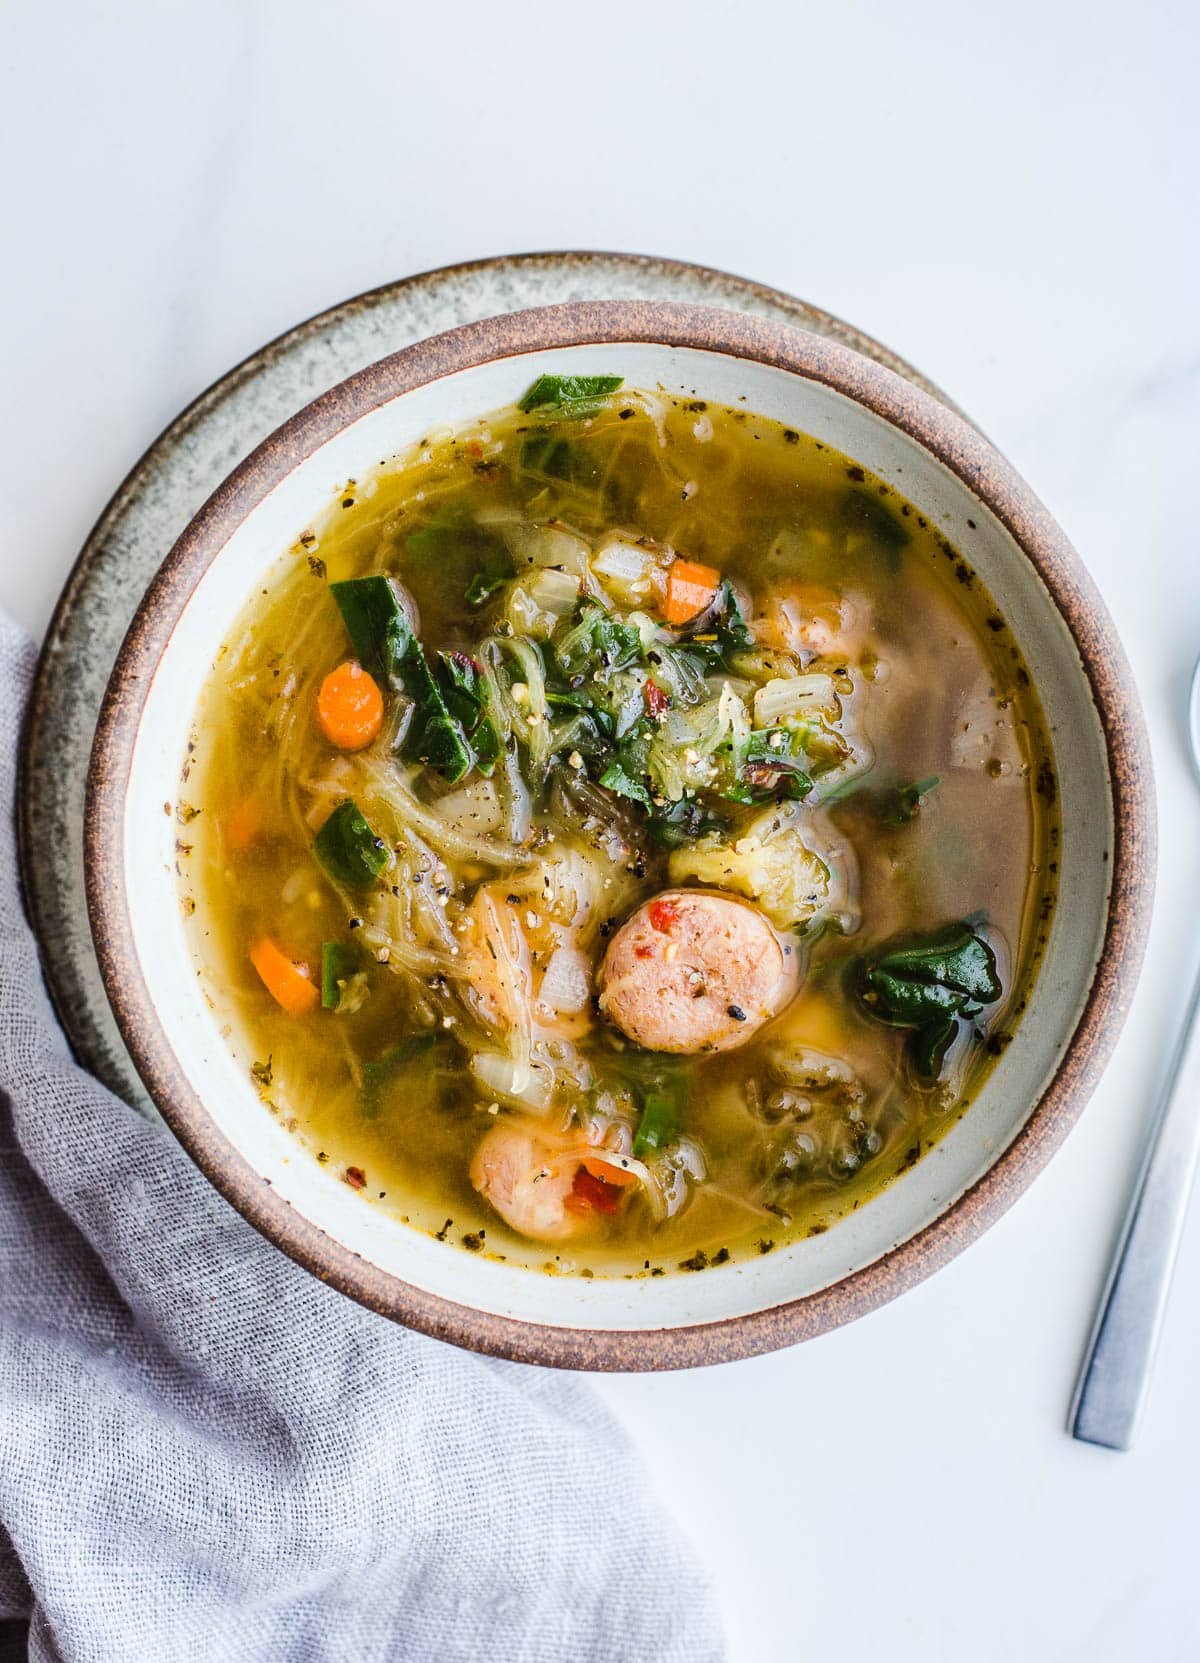 Vegetable and sausage soup in a rustic bowl.